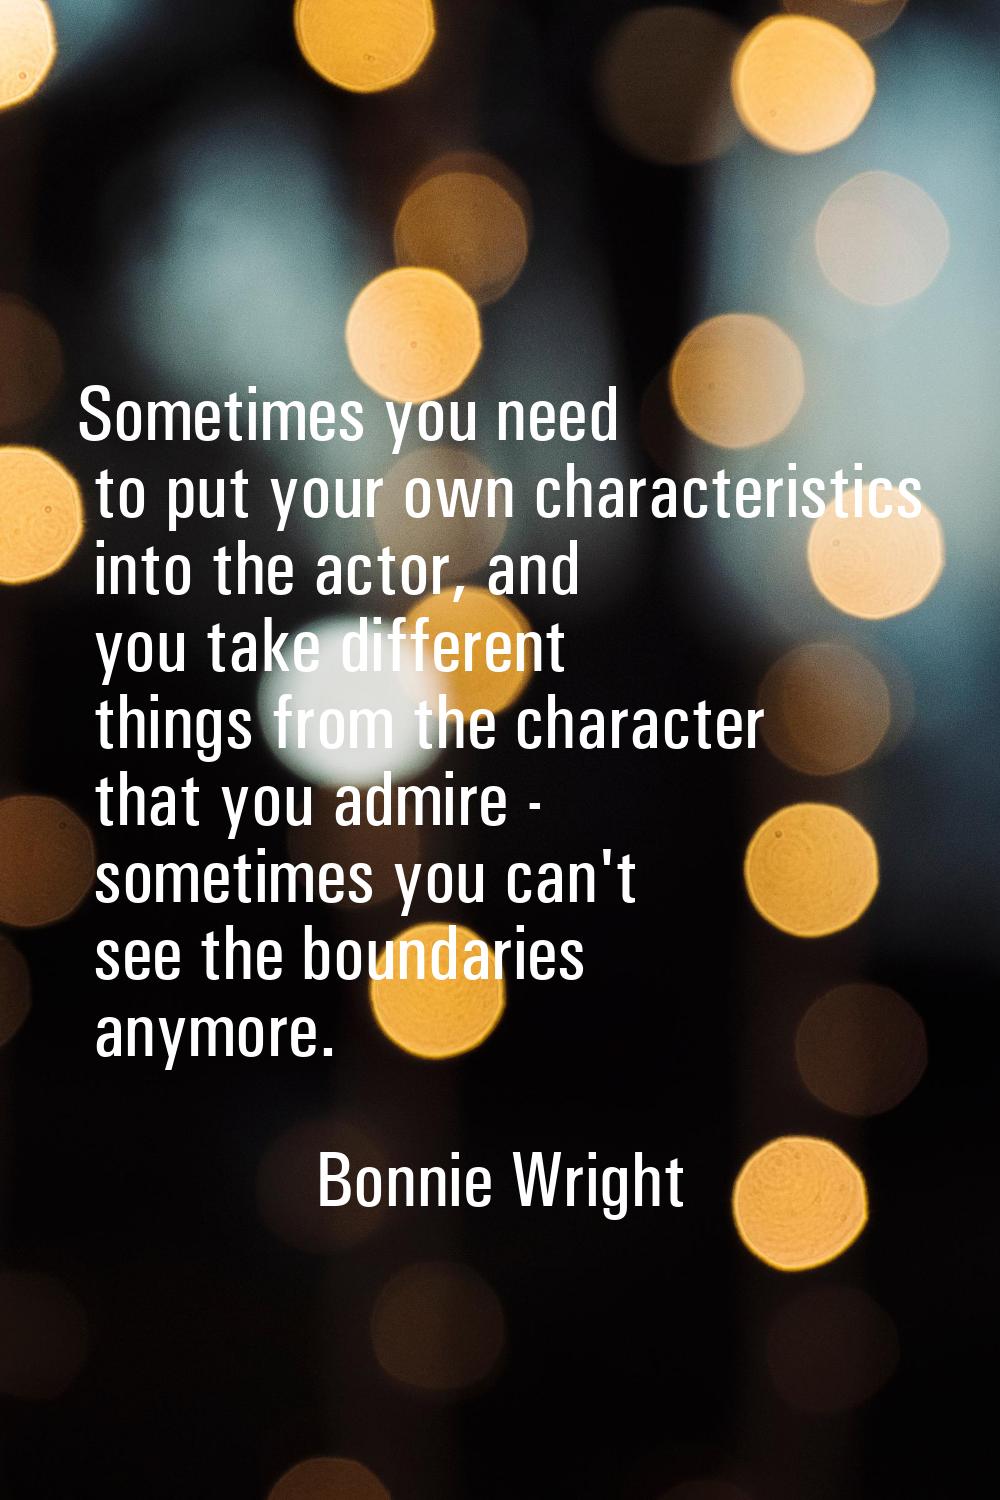 Sometimes you need to put your own characteristics into the actor, and you take different things fr